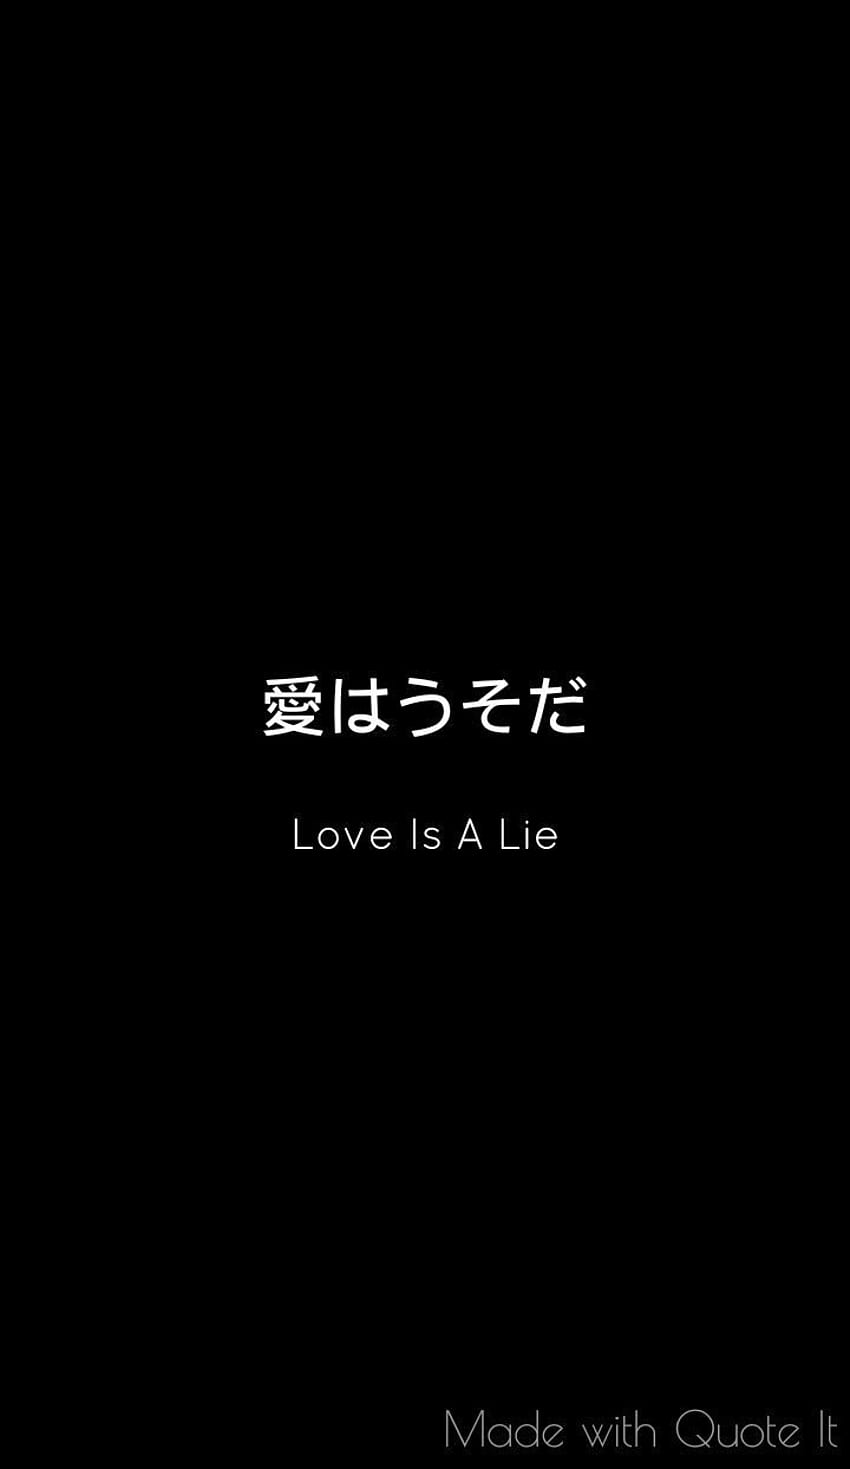 The love is a really lie. Japanese quotes, Japan quotes, Japanese ...